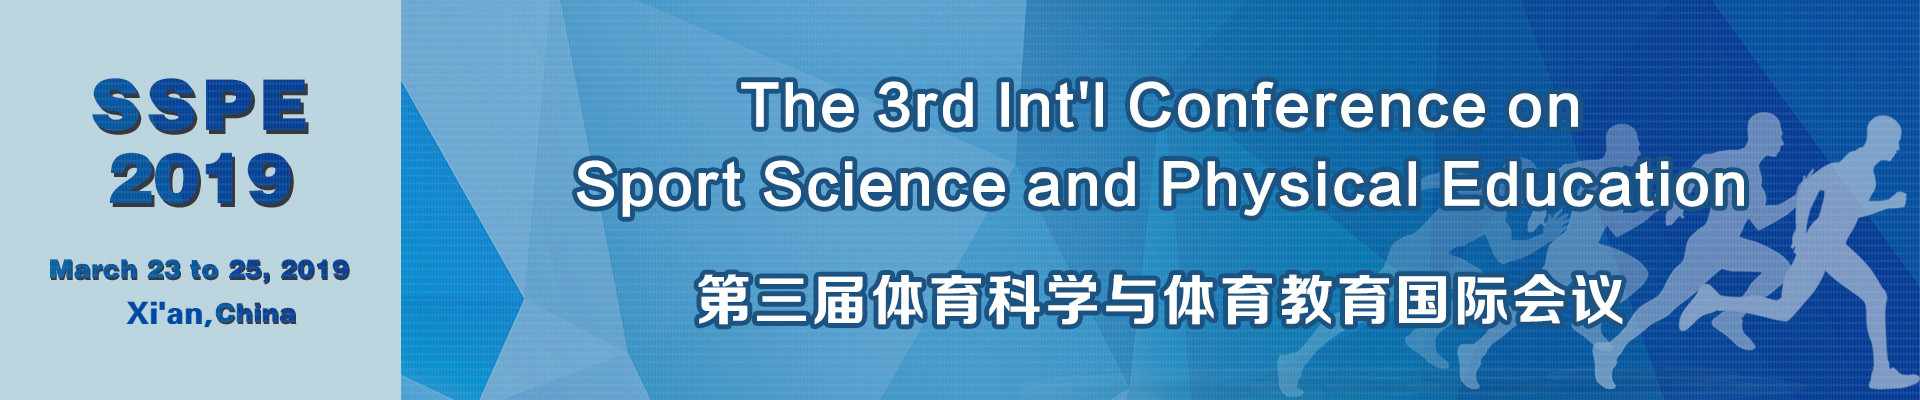 The 3rd Int'l Conference on Sport Science and Physical Education (SSPE 2019), Xi'an, Shanxi, China